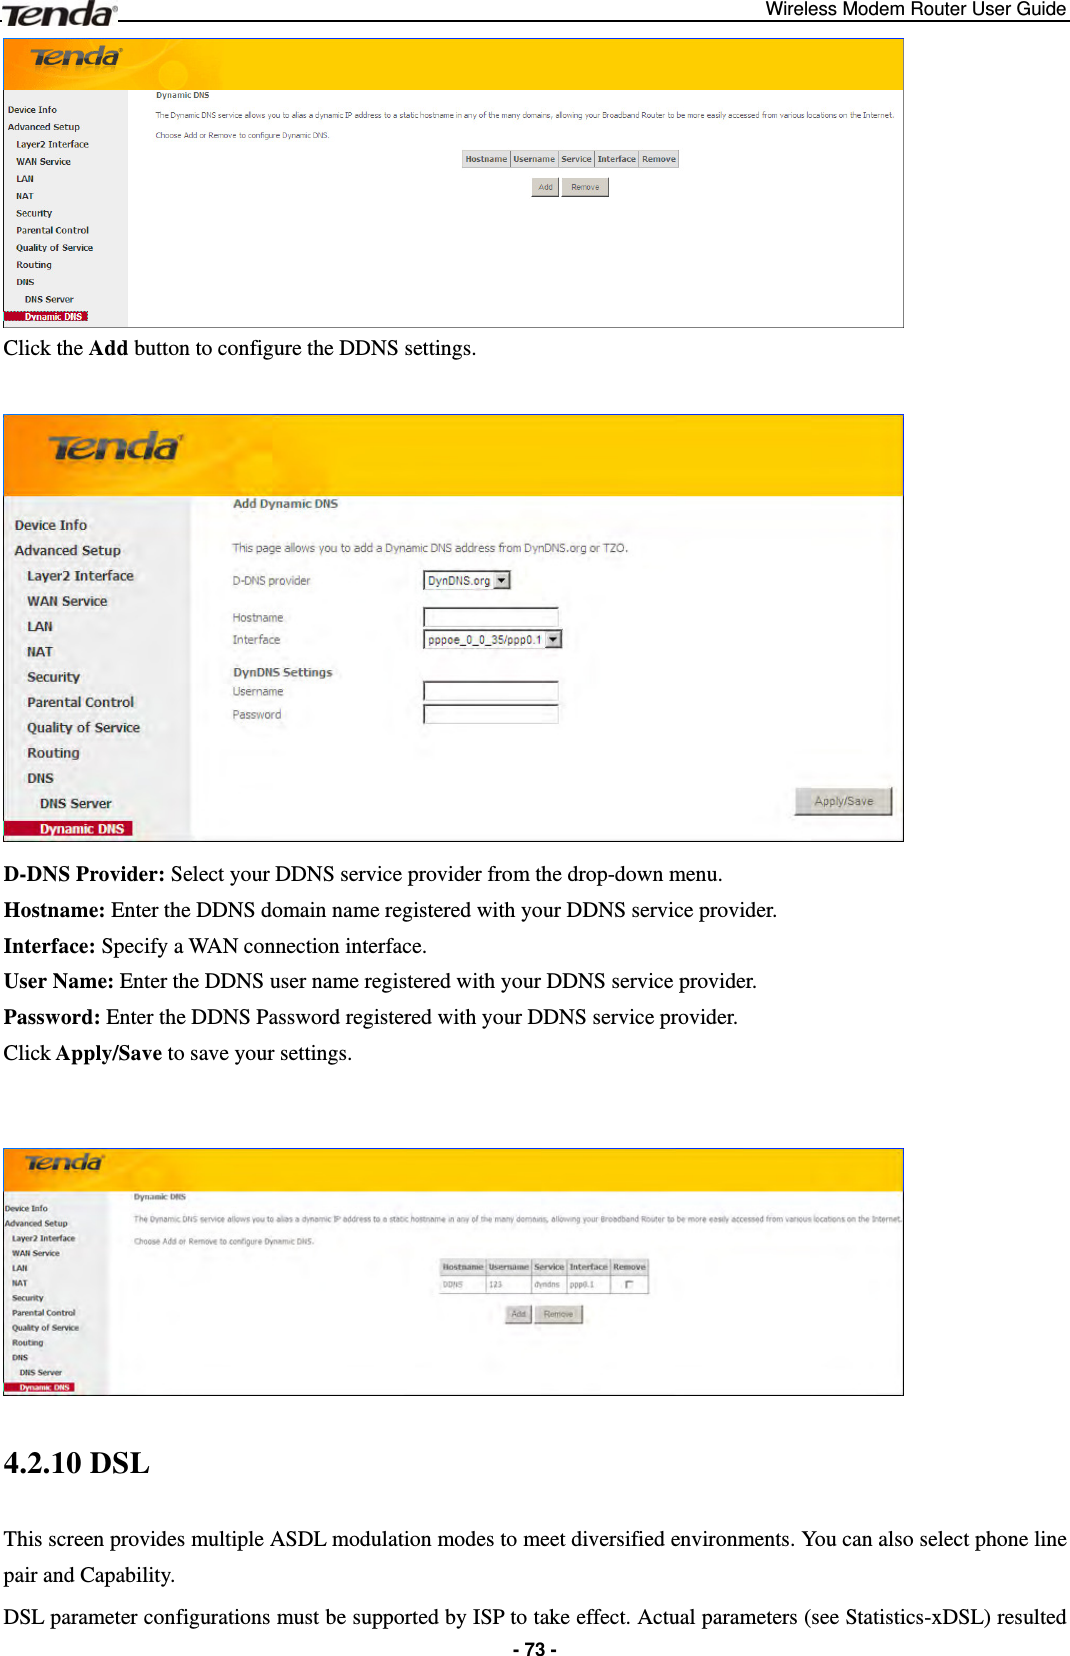 Wireless Modem Router User Guide  - 73 - Click the Add button to configure the DDNS settings.   D-DNS Provider: Select your DDNS service provider from the drop-down menu. Hostname: Enter the DDNS domain name registered with your DDNS service provider. Interface: Specify a WAN connection interface. User Name: Enter the DDNS user name registered with your DDNS service provider. Password: Enter the DDNS Password registered with your DDNS service provider. Click Apply/Save to save your settings.    4.2.10 DSL This screen provides multiple ASDL modulation modes to meet diversified environments. You can also select phone line pair and Capability. DSL parameter configurations must be supported by ISP to take effect. Actual parameters (see Statistics-xDSL) resulted 